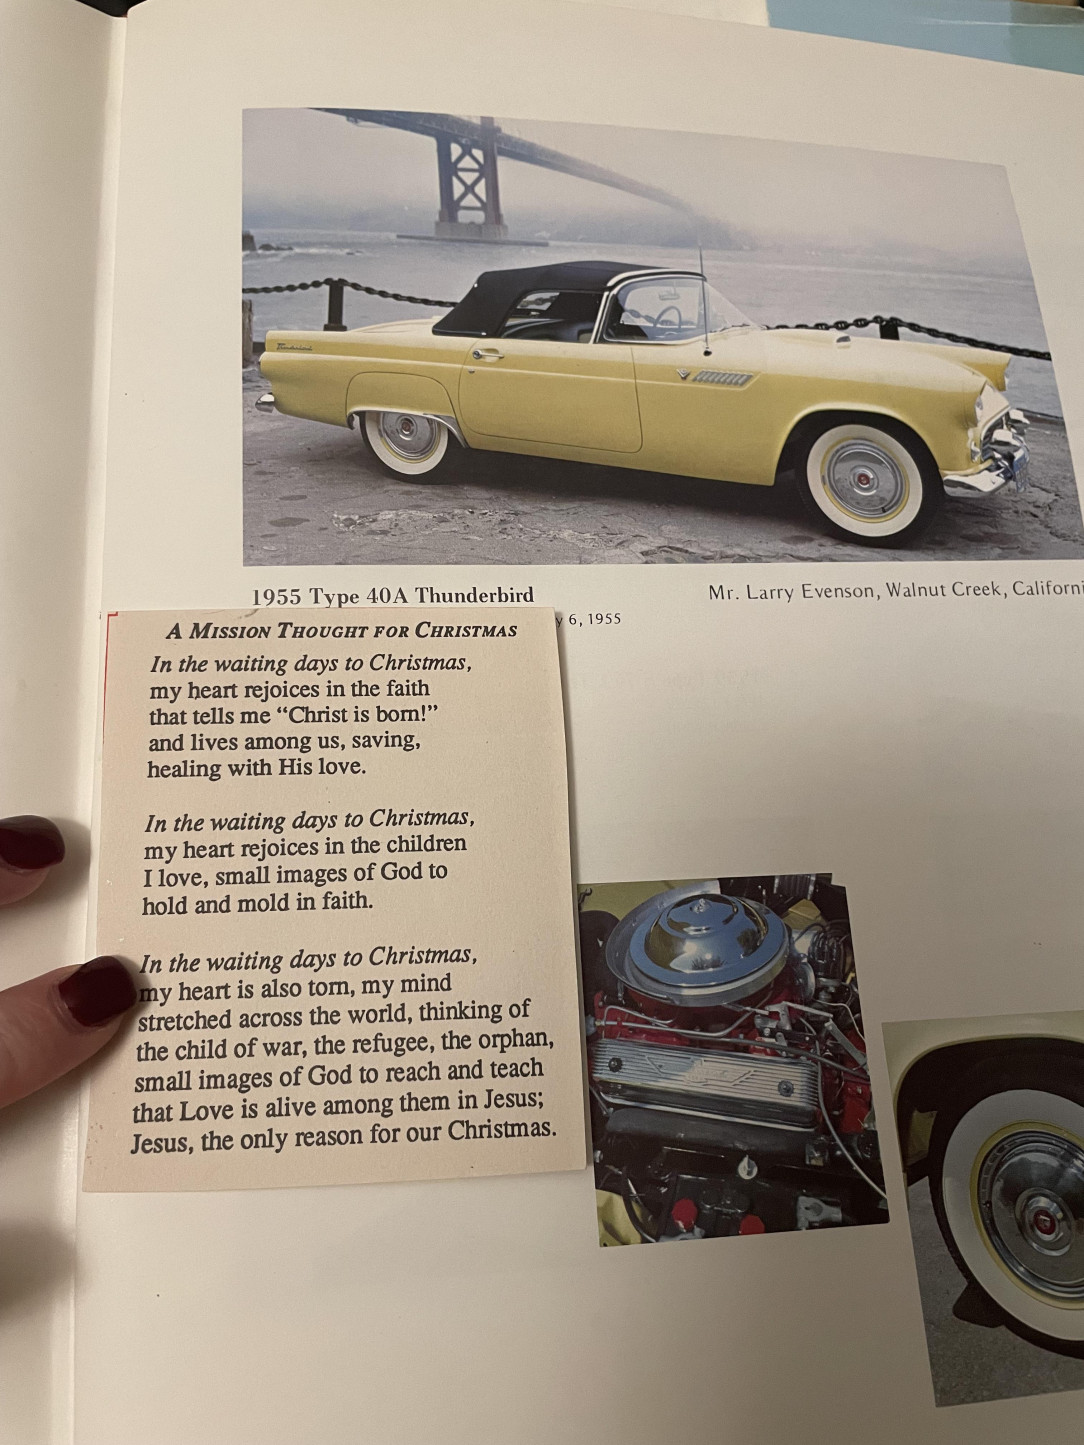 Bought a book about Thunderbirds at a museum. This was inside